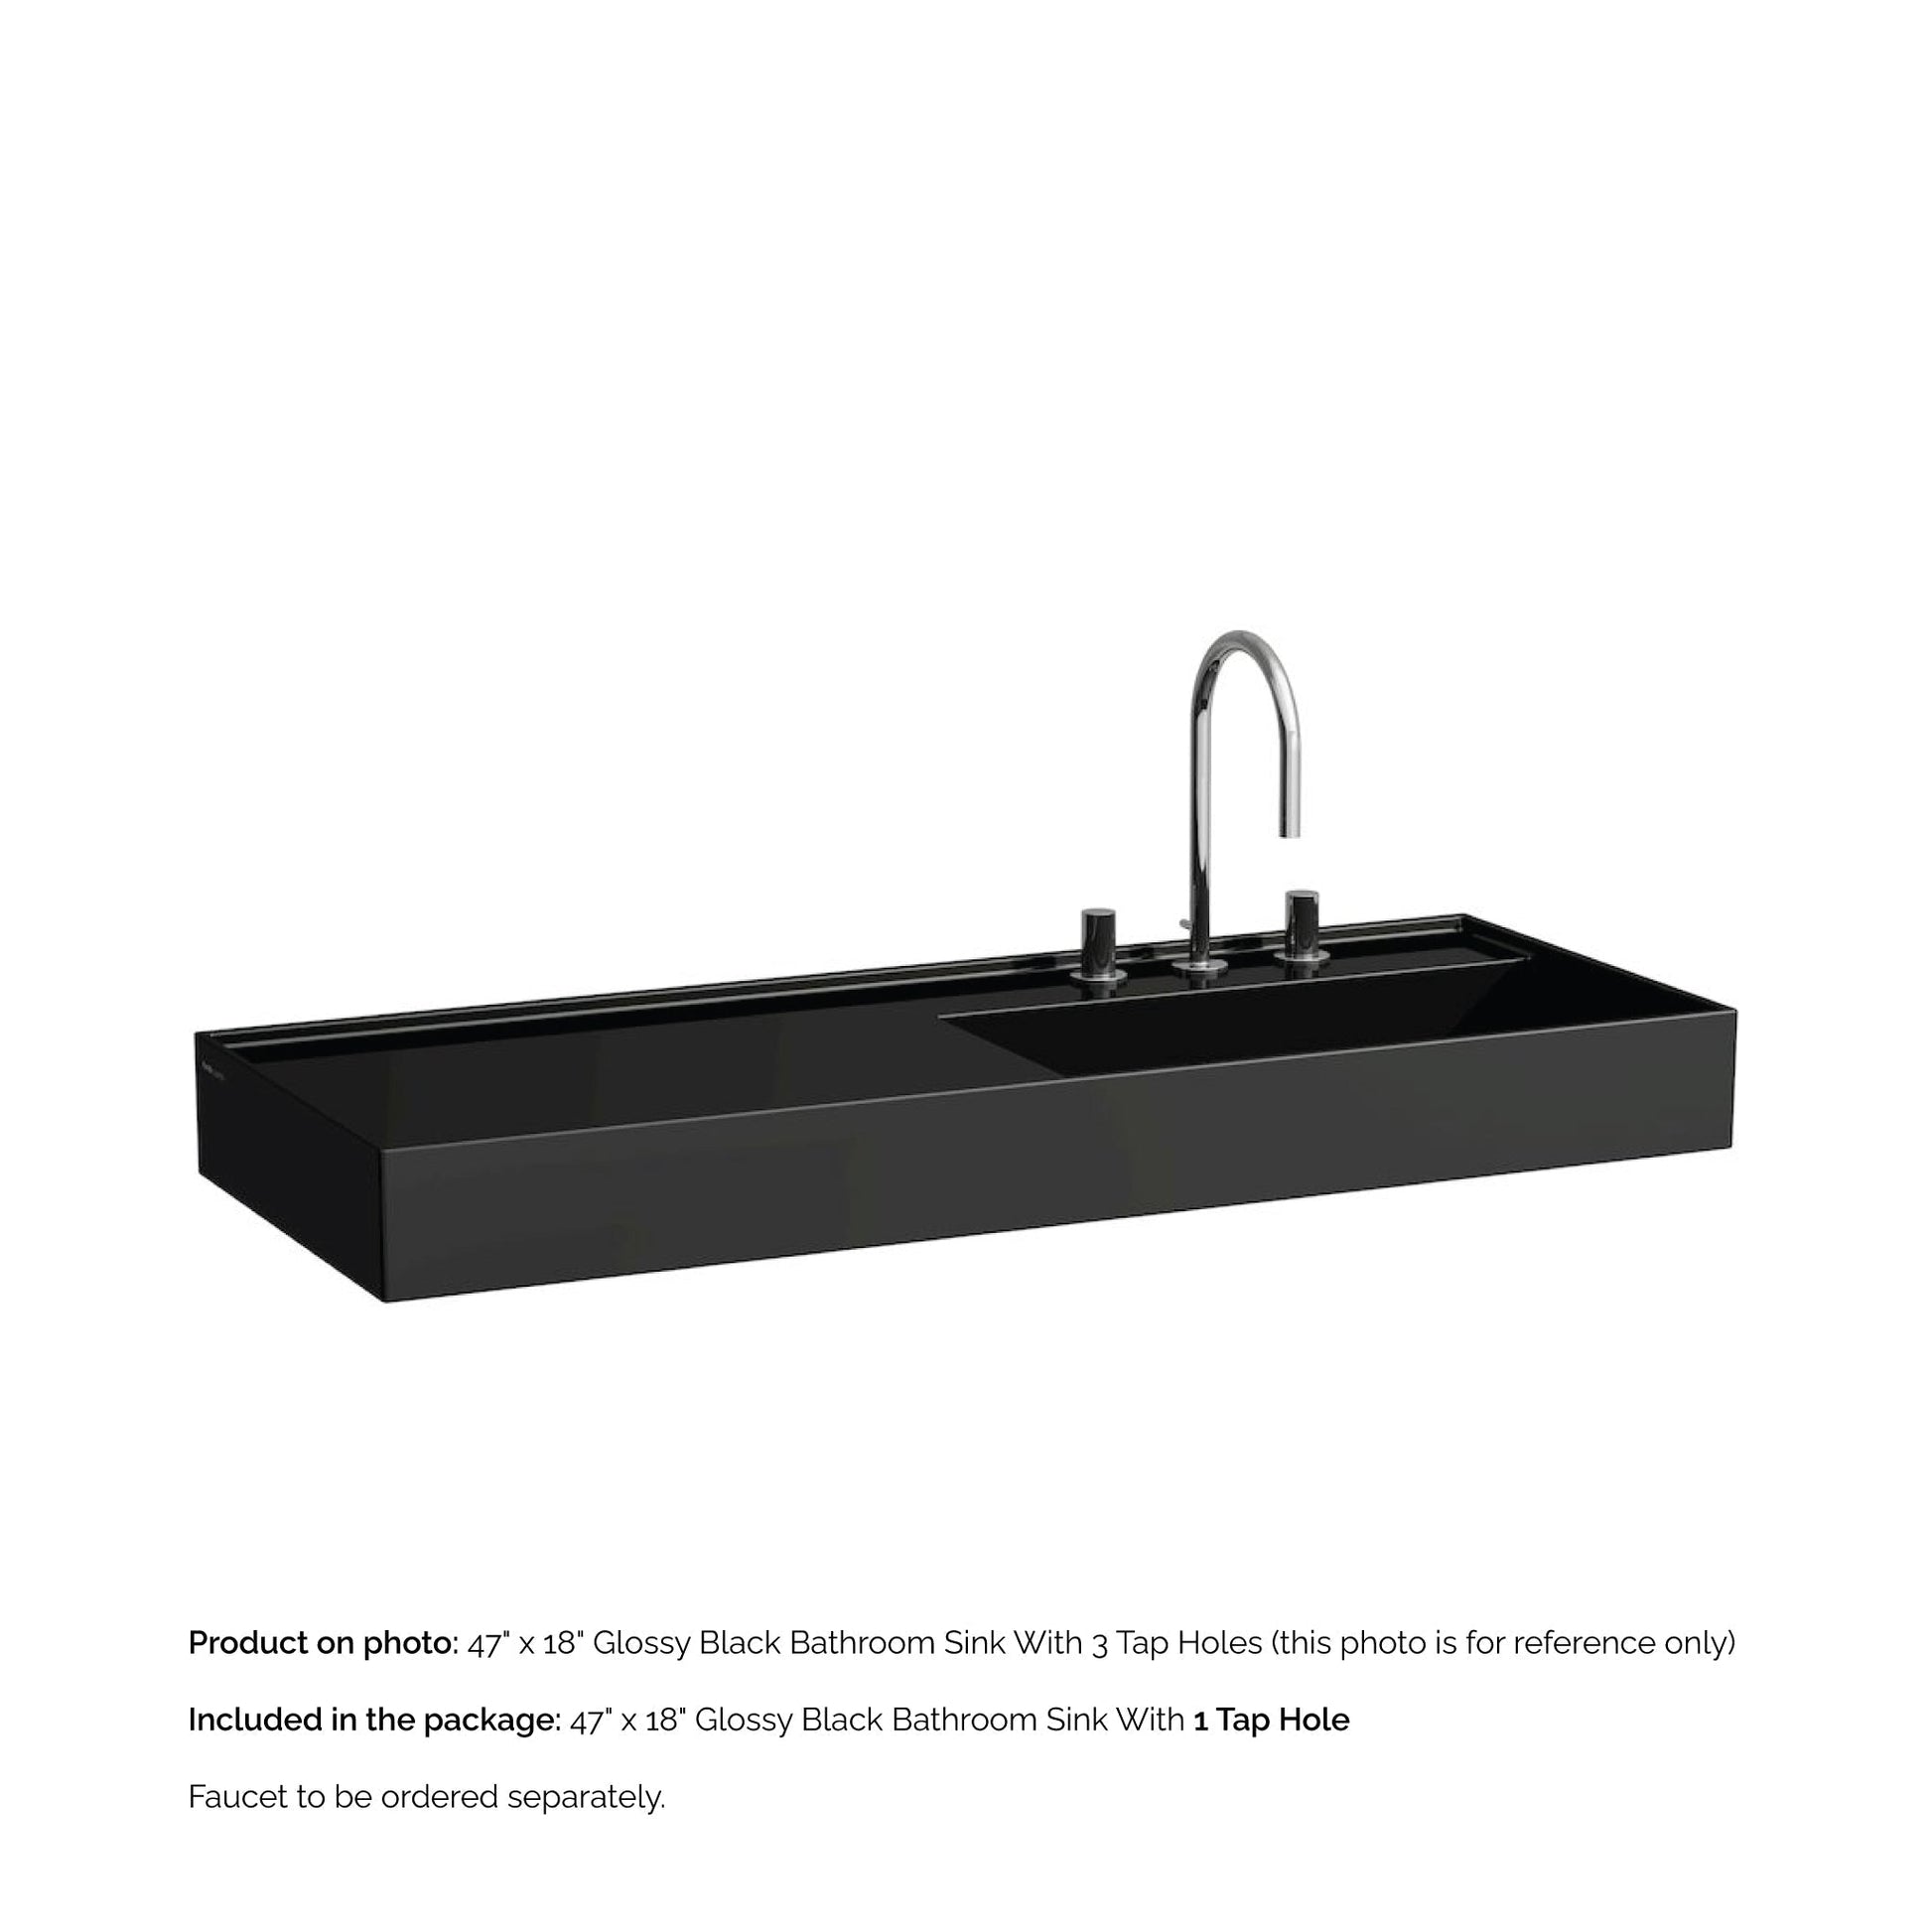 Laufen Kartell 47" x 18" Glossy Black Wall-Mounted Shelf-Left Bathroom Sink With Faucet Hole